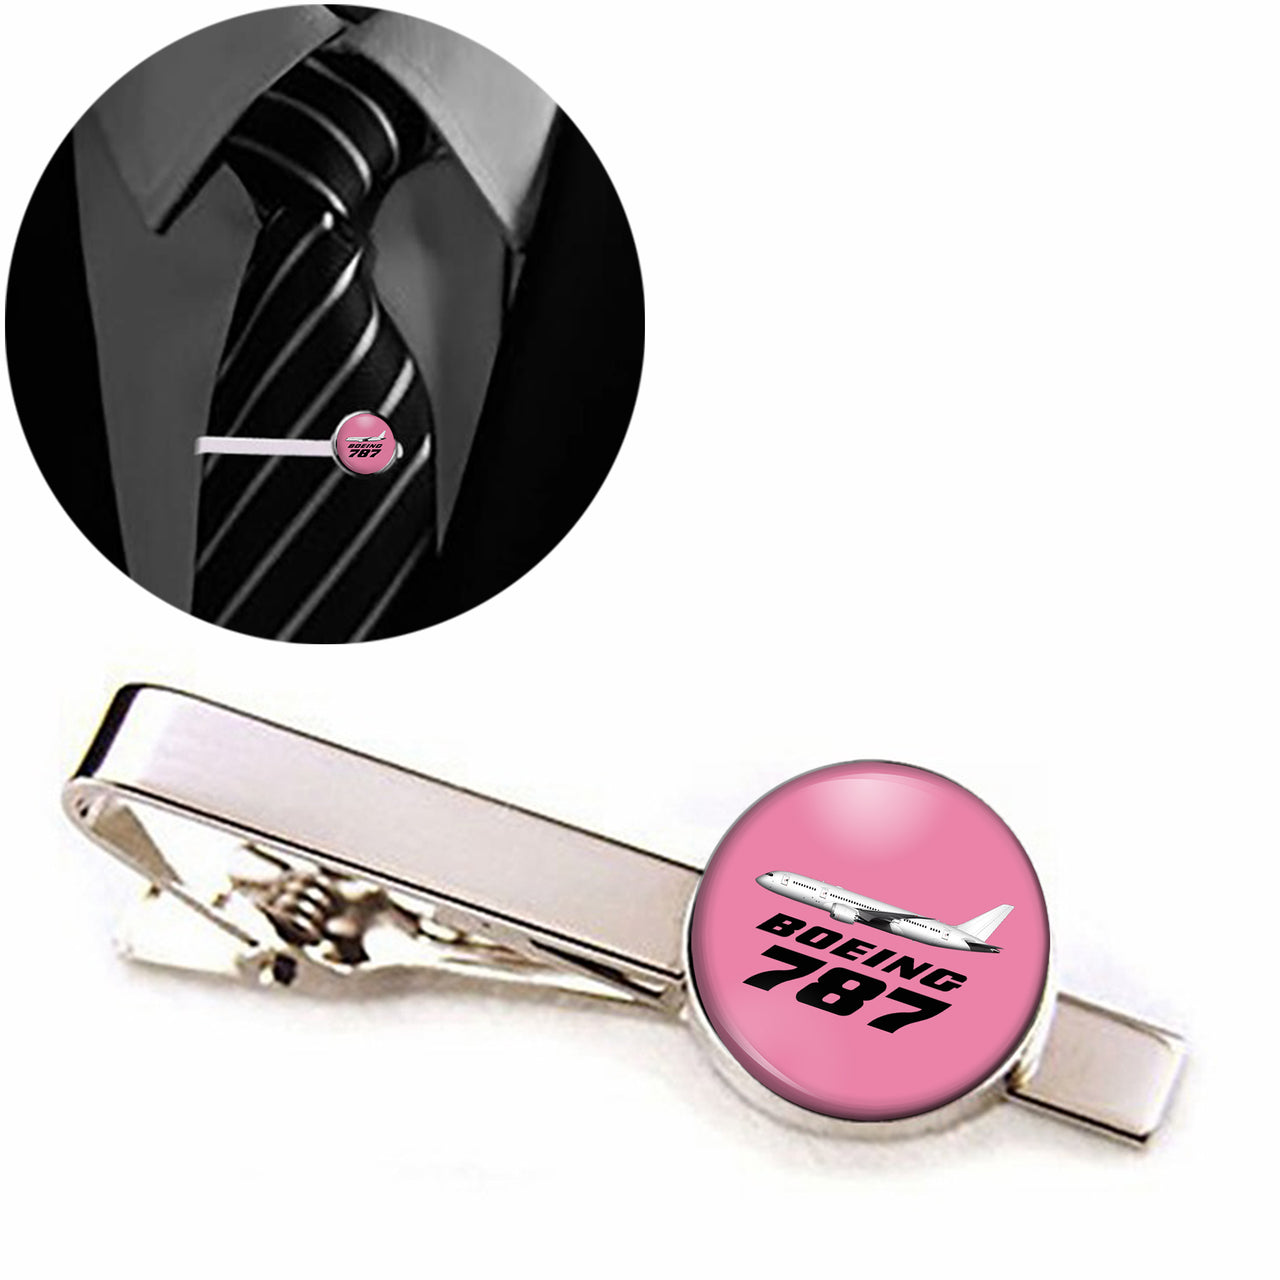 The Boeing 787 Designed Tie Clips